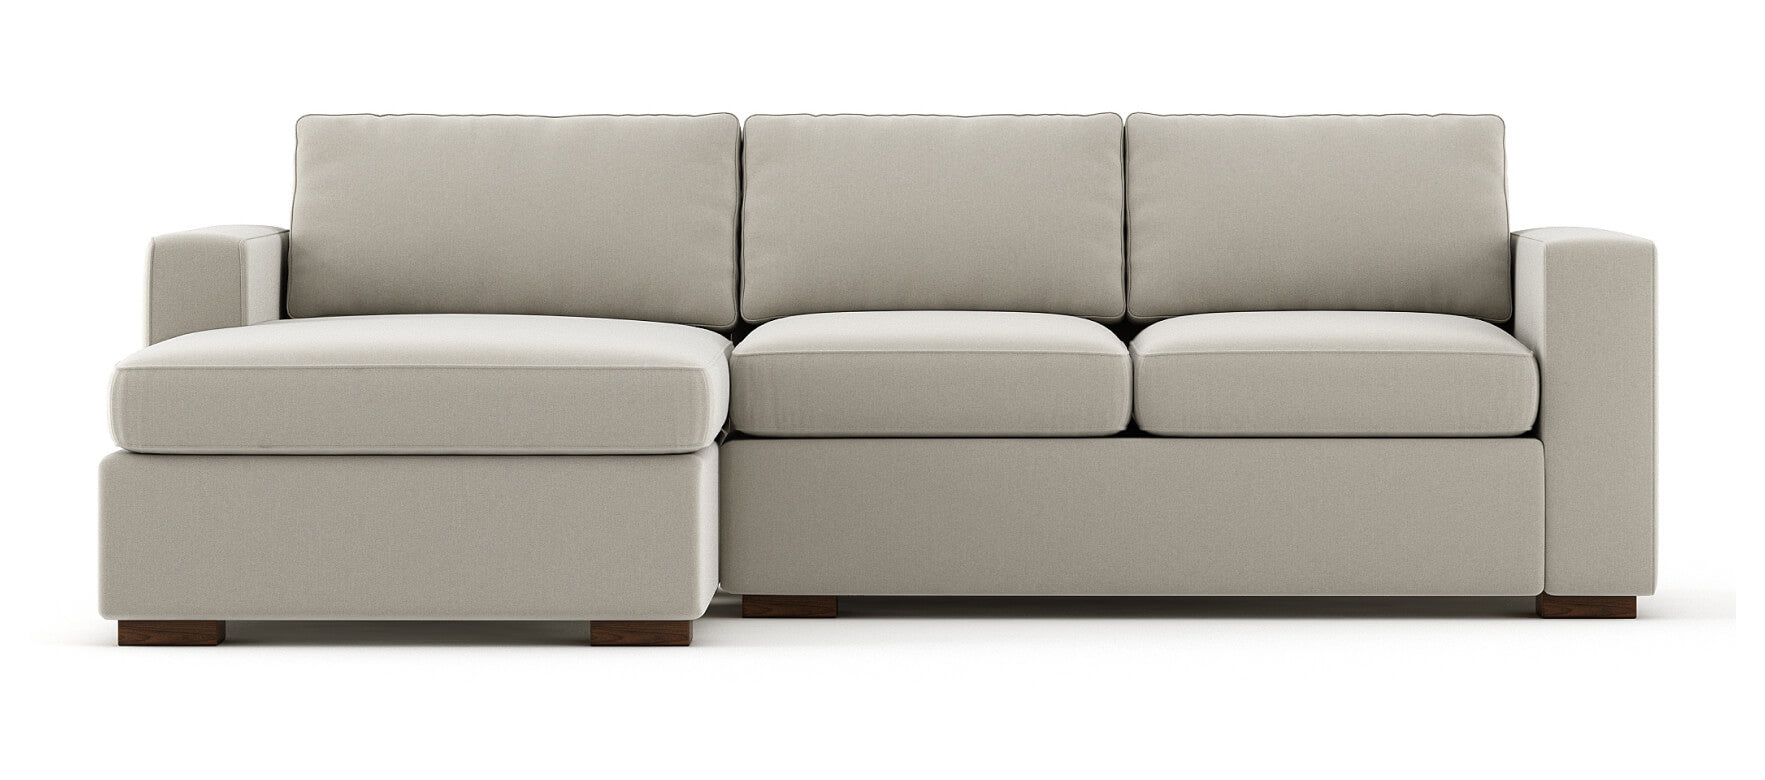 G: Rio Chaise Sectional in Smart Pure Fabric